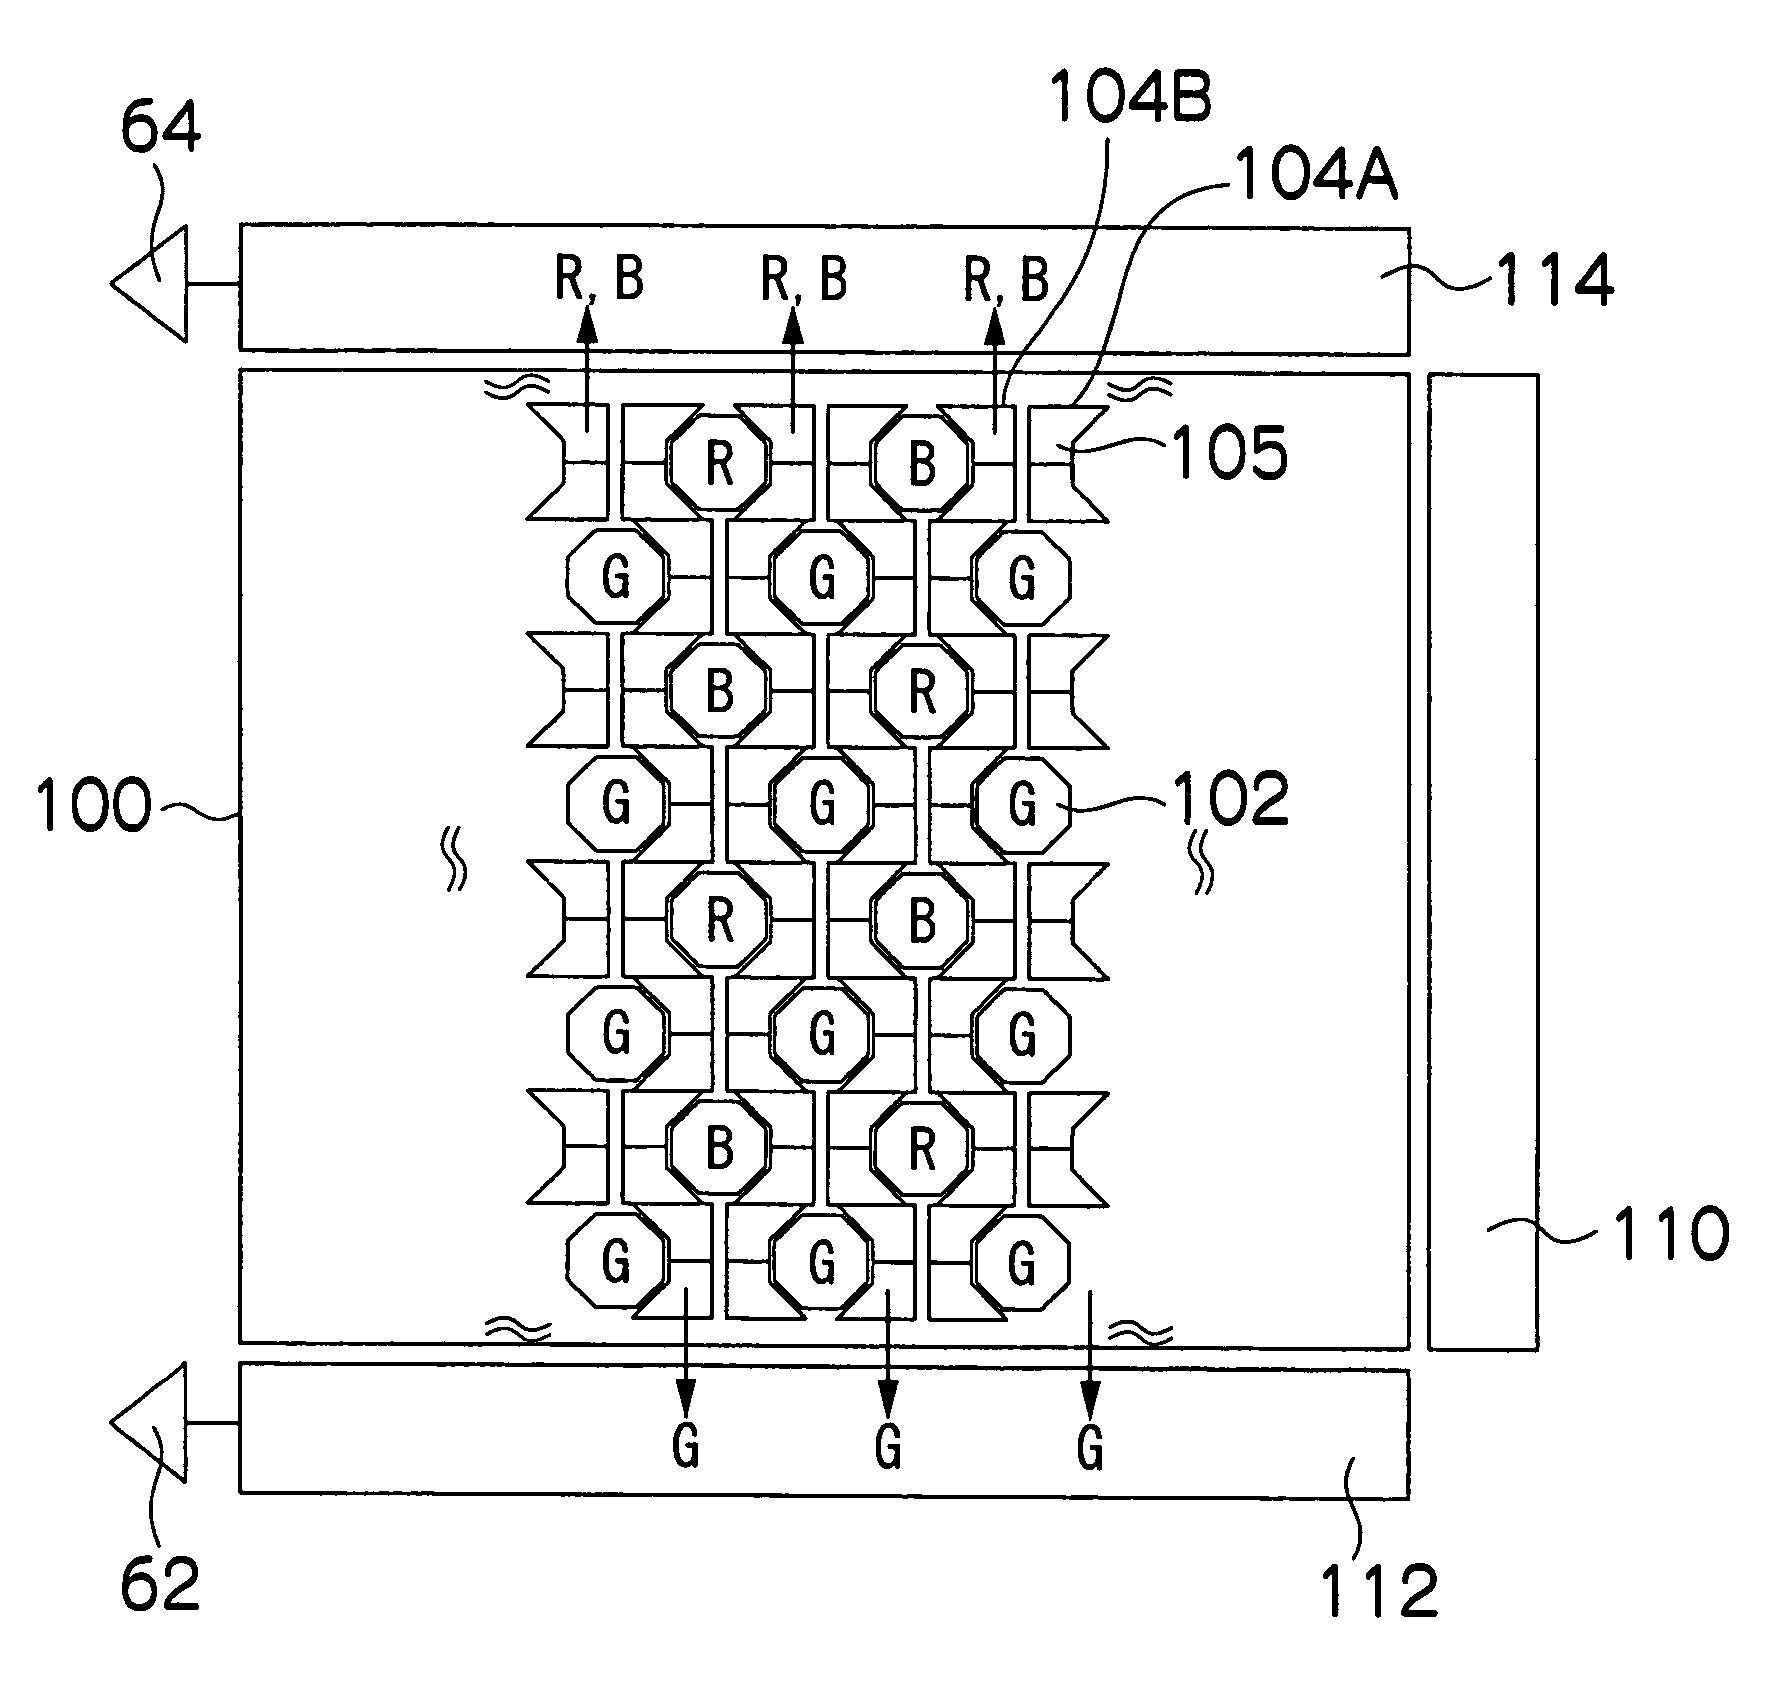 Image-taking apparatus including a vertical transfer control device